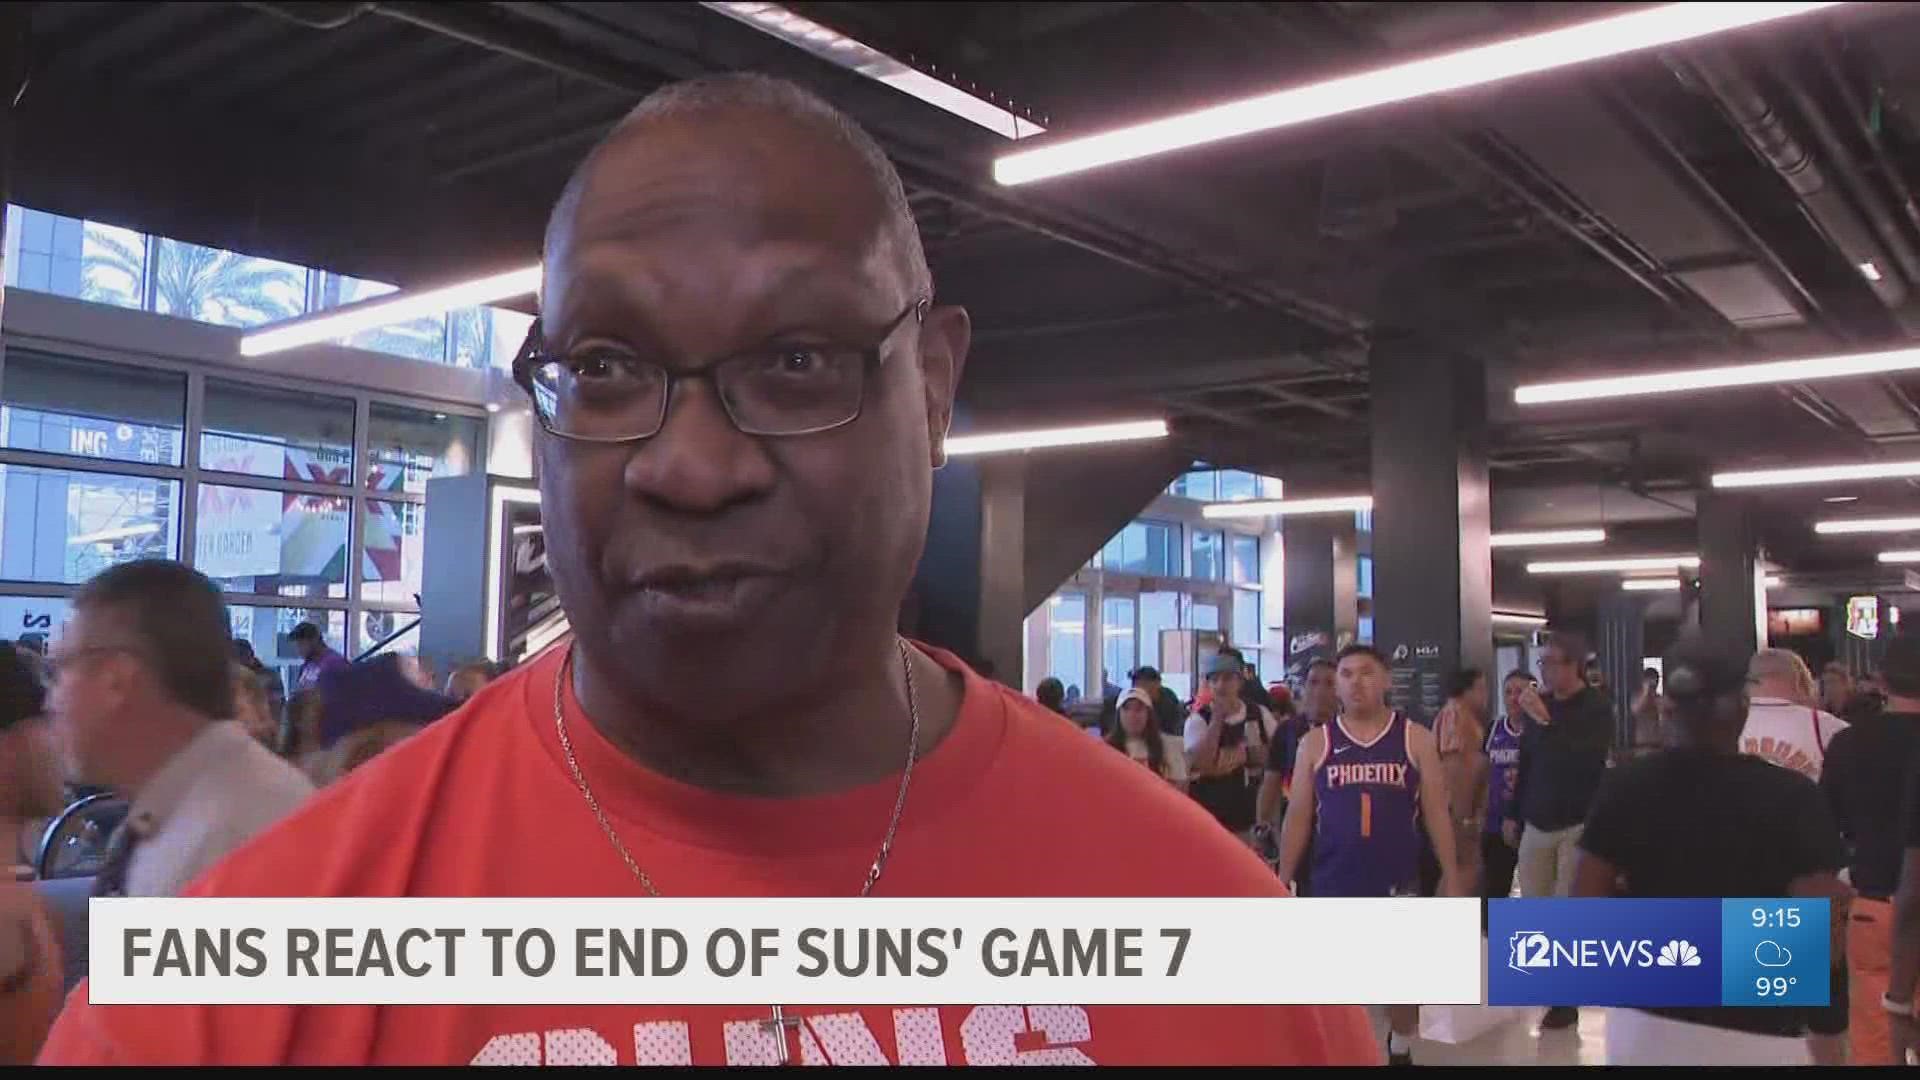 Many fans had choice words for the Suns after the team's shocking loss to the Dallas Mavericks.